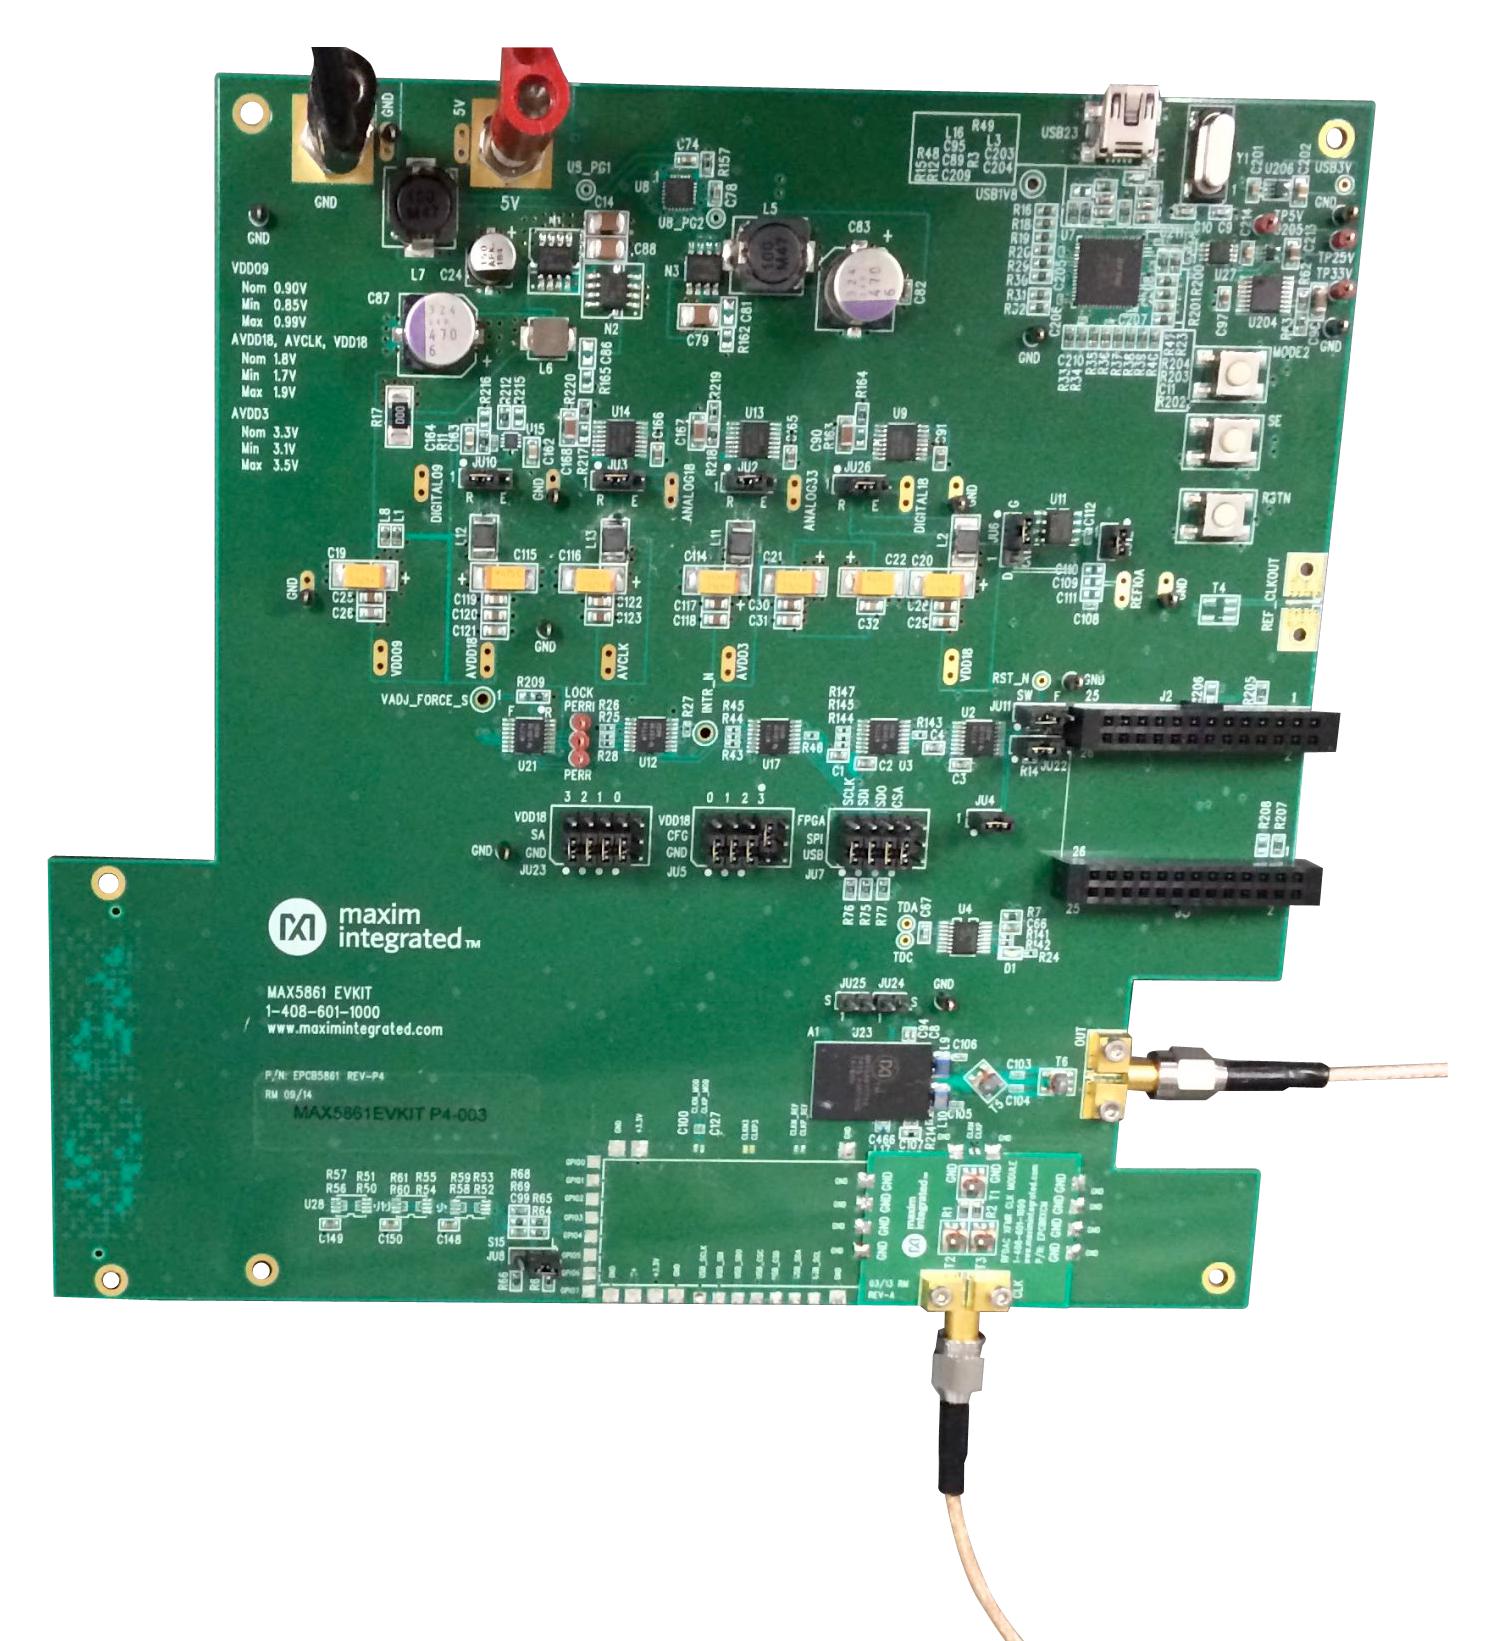 MAX5861EVKIT# EVAL KIT, SCQAM & OFDM CABLE MODULATOR MAXIM INTEGRATED / ANALOG DEVICES